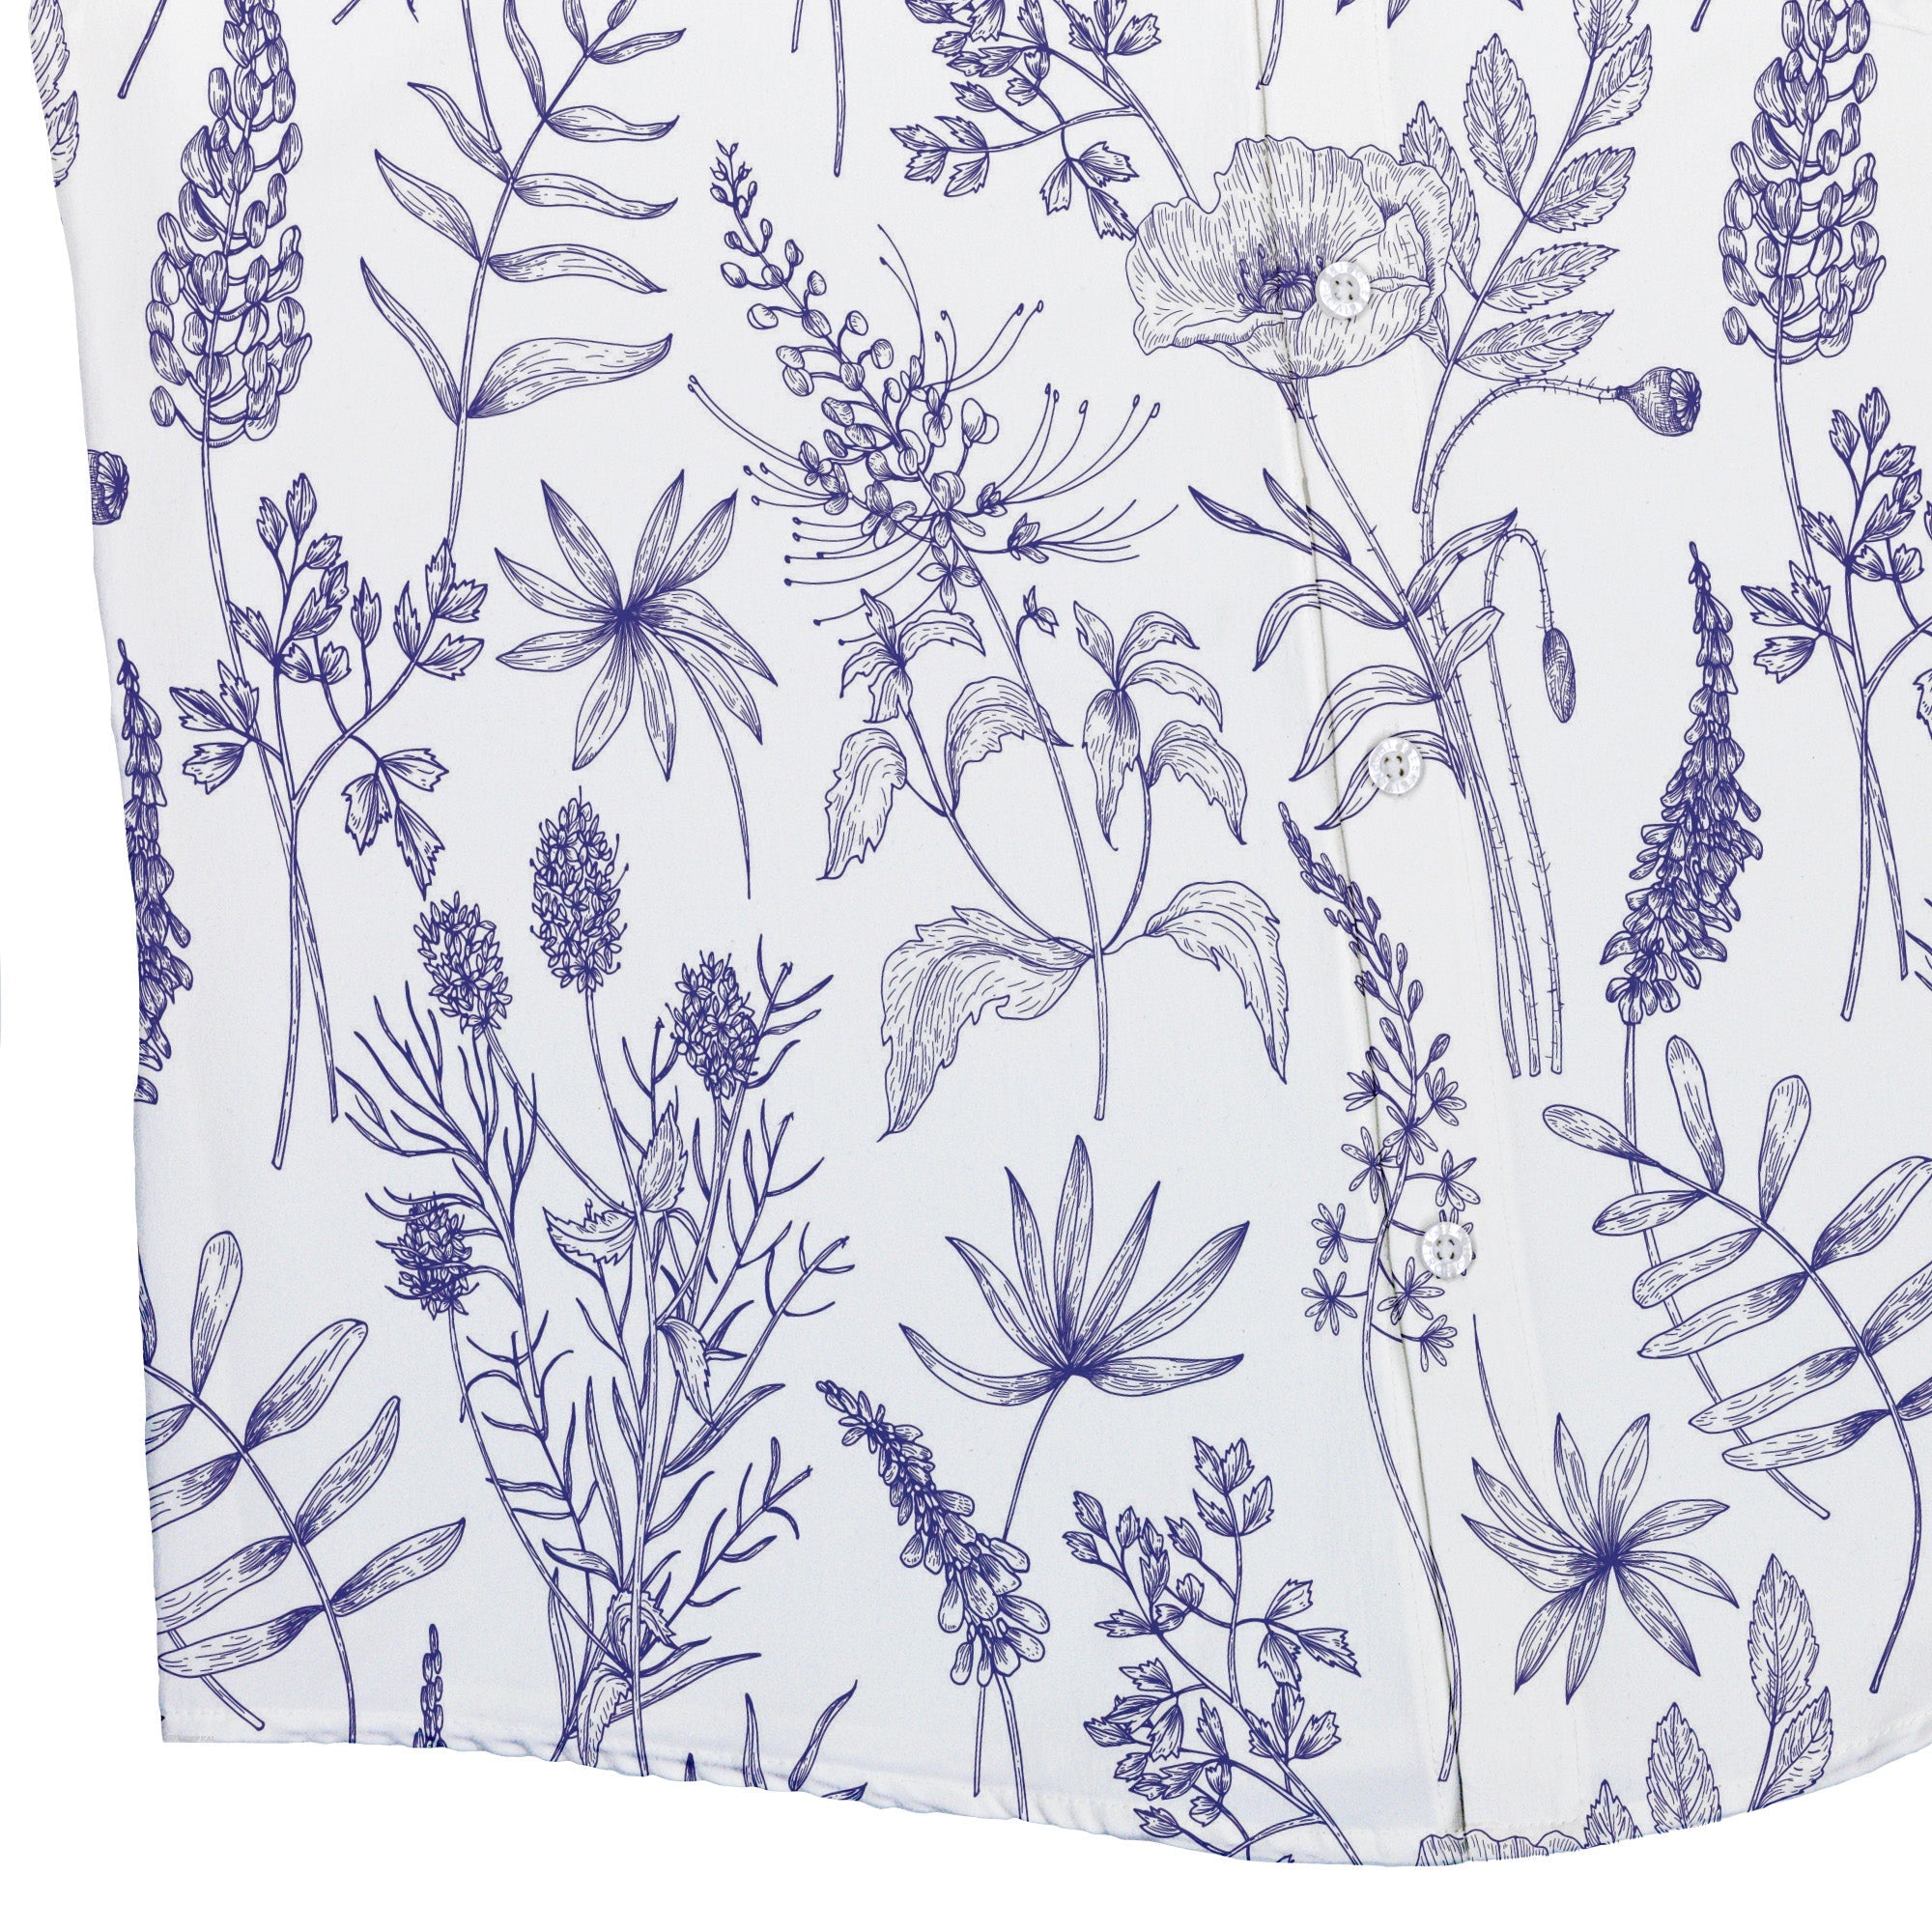 Simple Botany Flowers Herbs White Blue Button Up Shirt